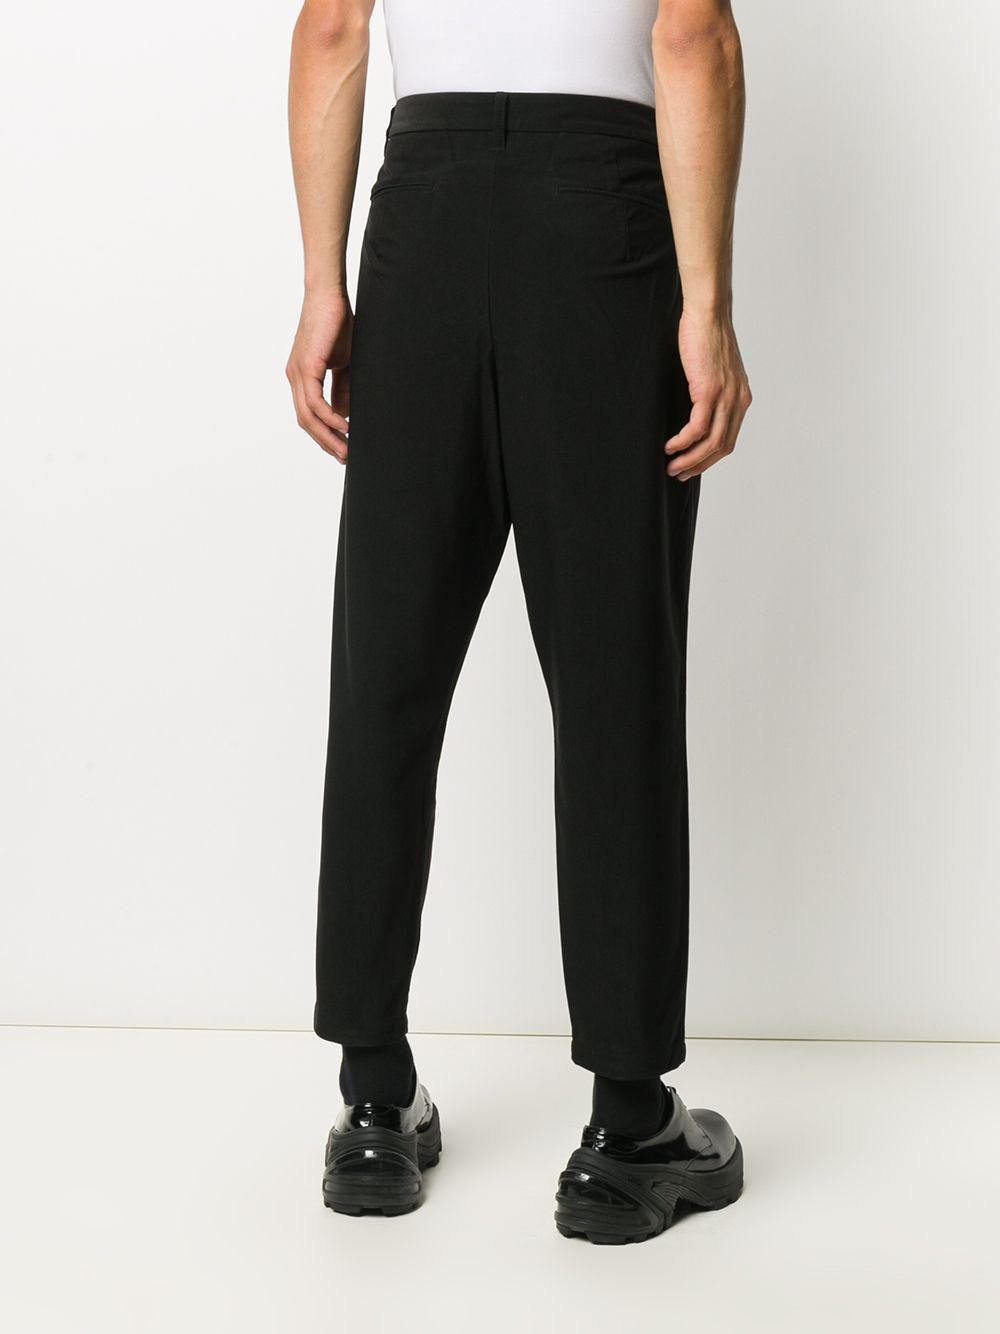 Attachment Synthetic Drop-crotch Tapered Trousers in Black for Men - Lyst